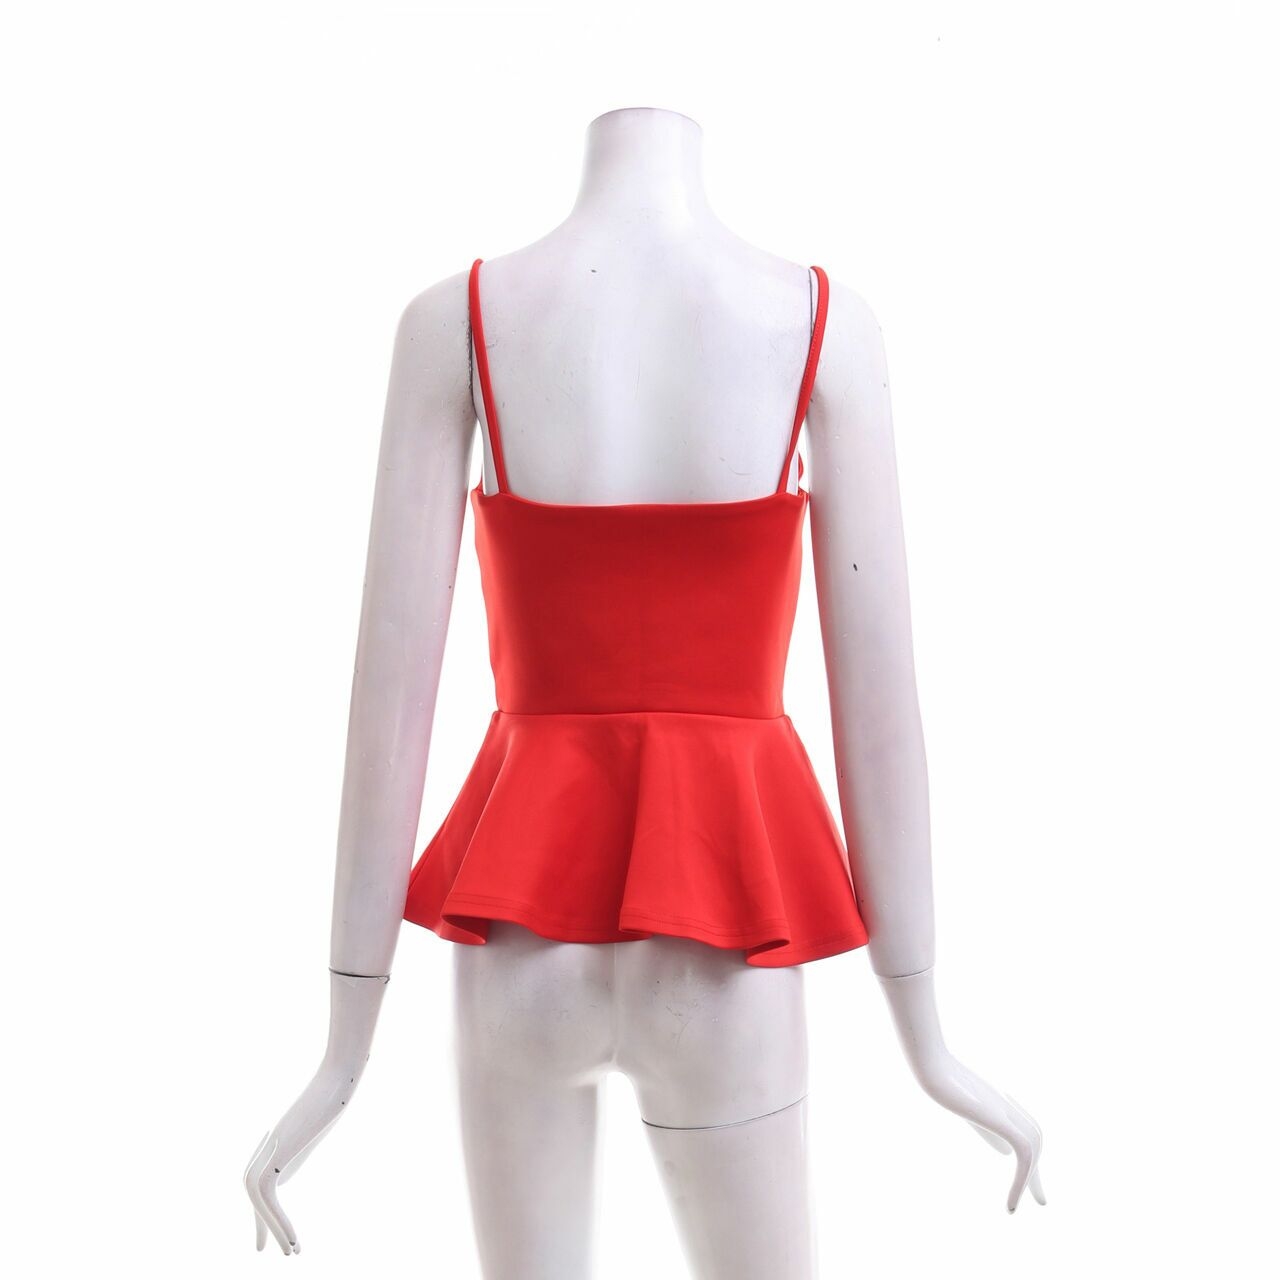 Supre Red Sleeveless